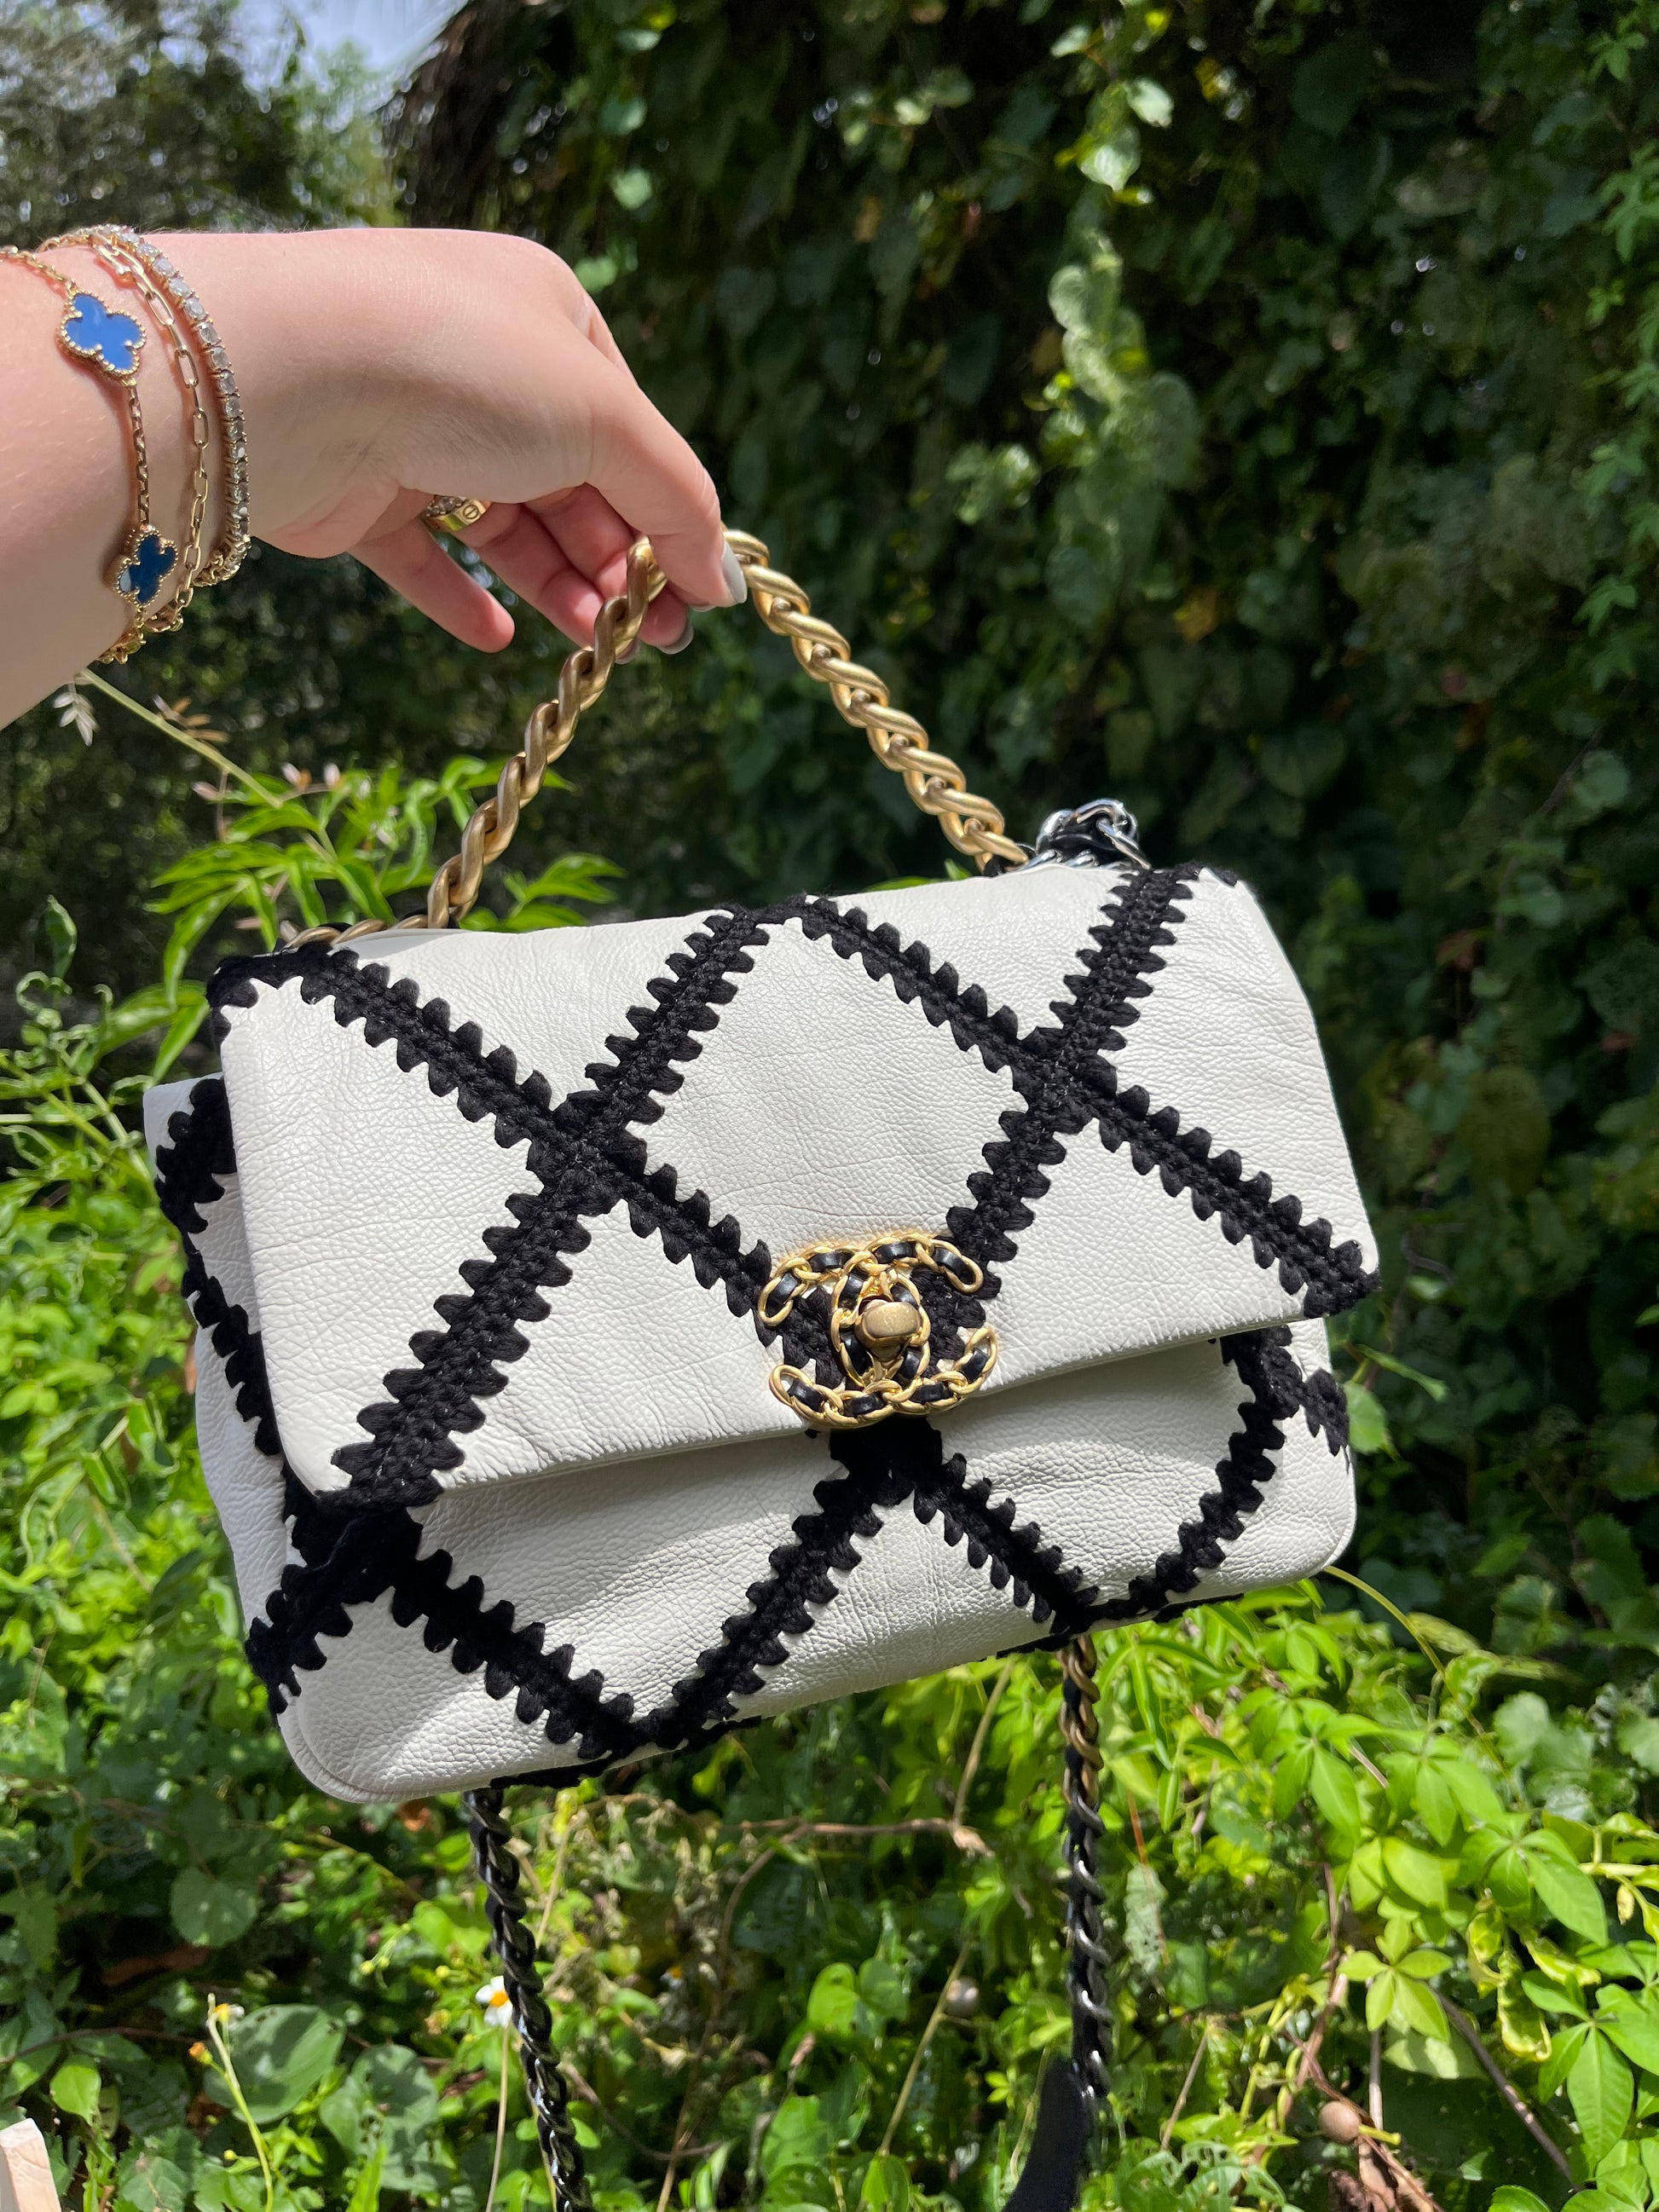 Why the Chanel 19 bag is set to dethrone the 2.55